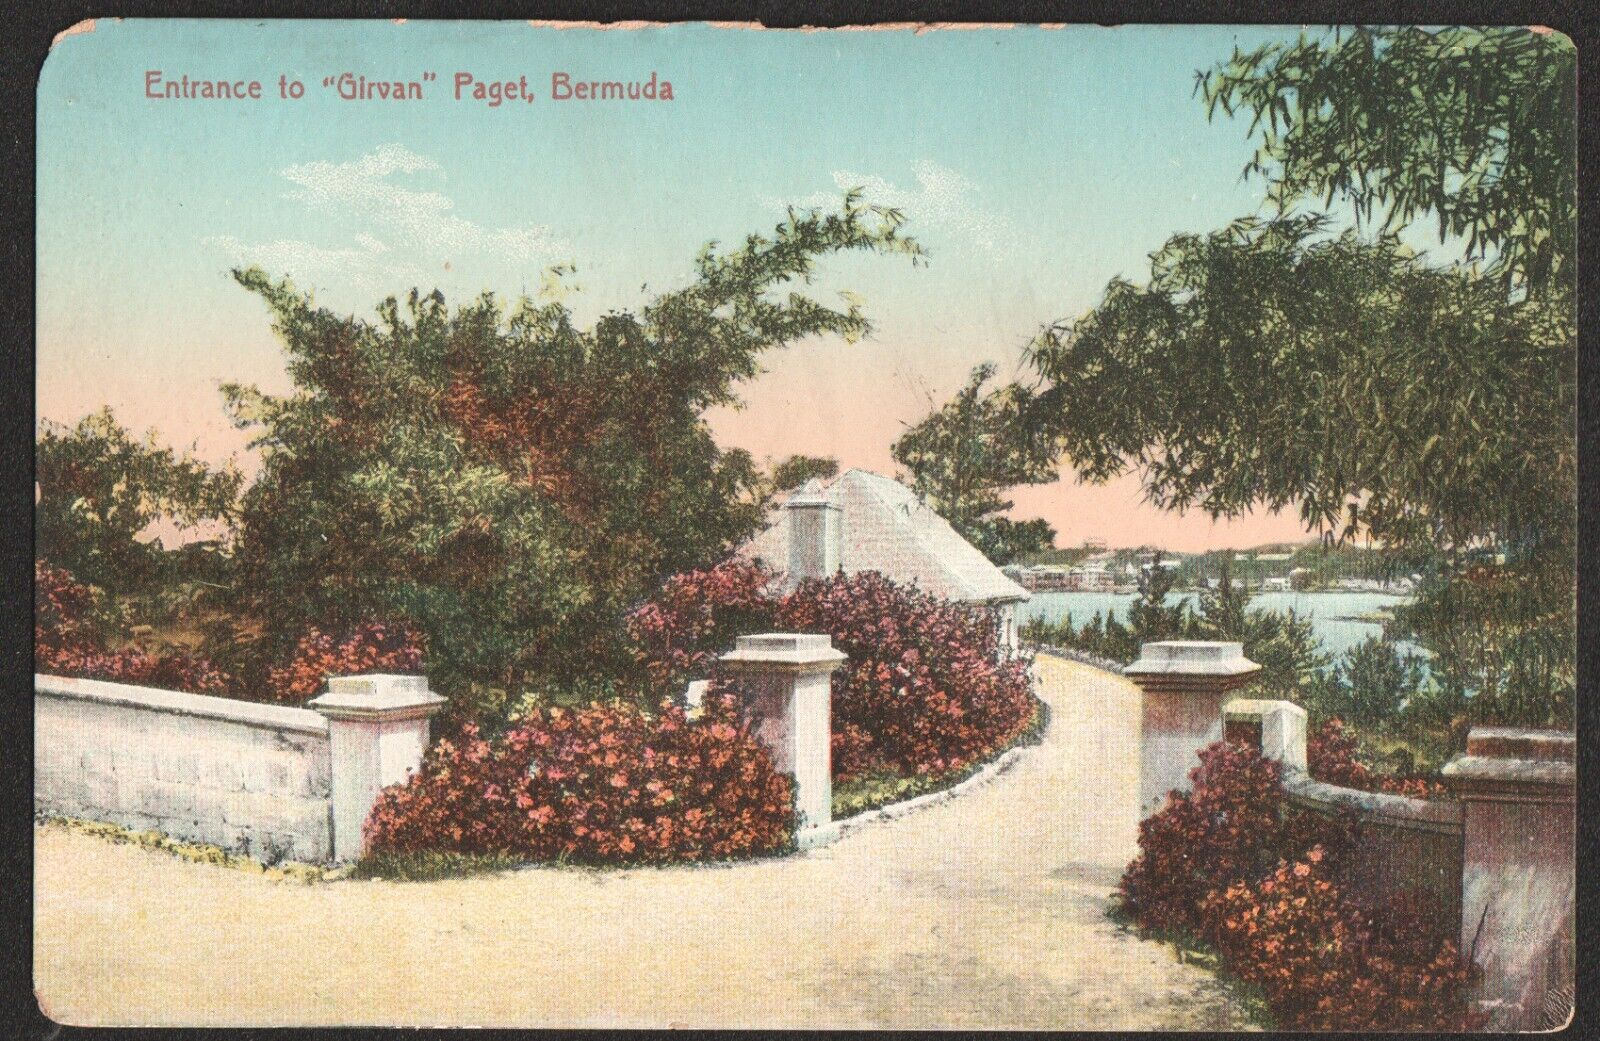 Entrance Girvan Paget Bermuda Divided Back Postcard 1907-1914 No 164 Wm Weiss Co